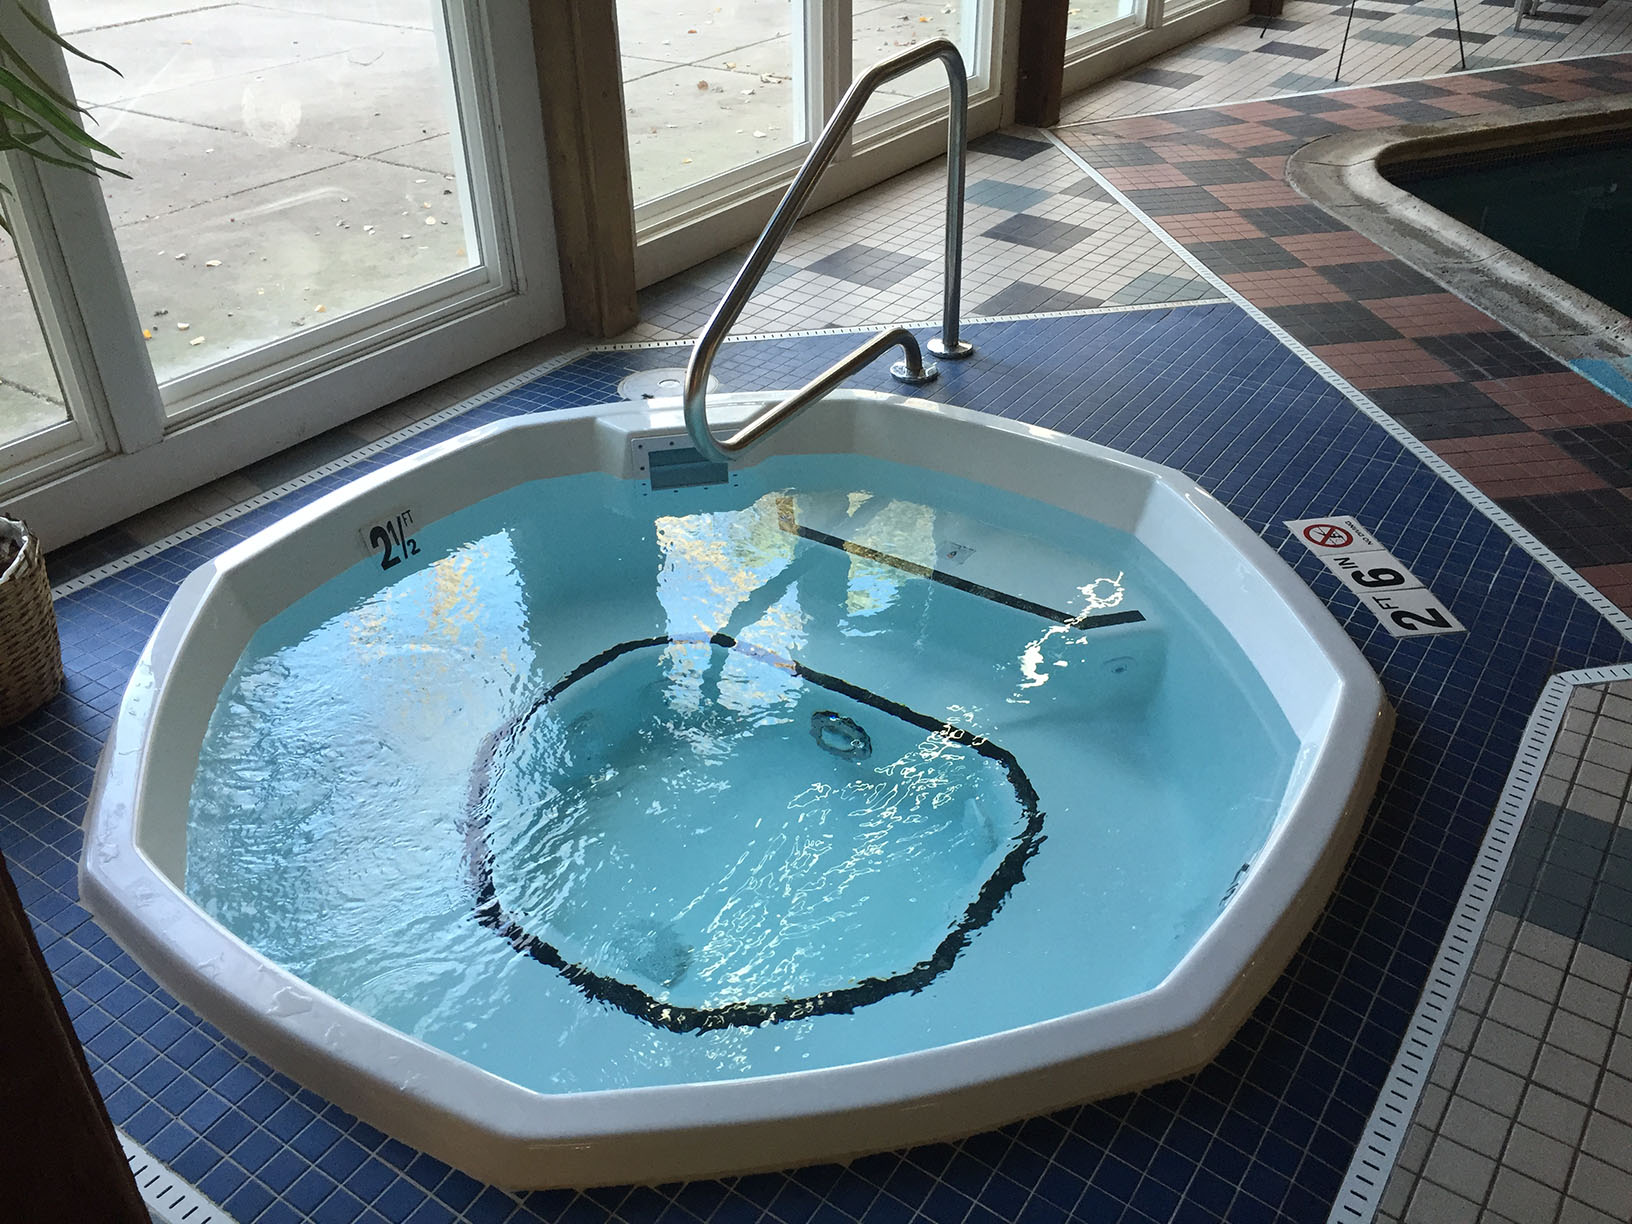 Complete Installation of In-Ground Acrylic Hot Tub